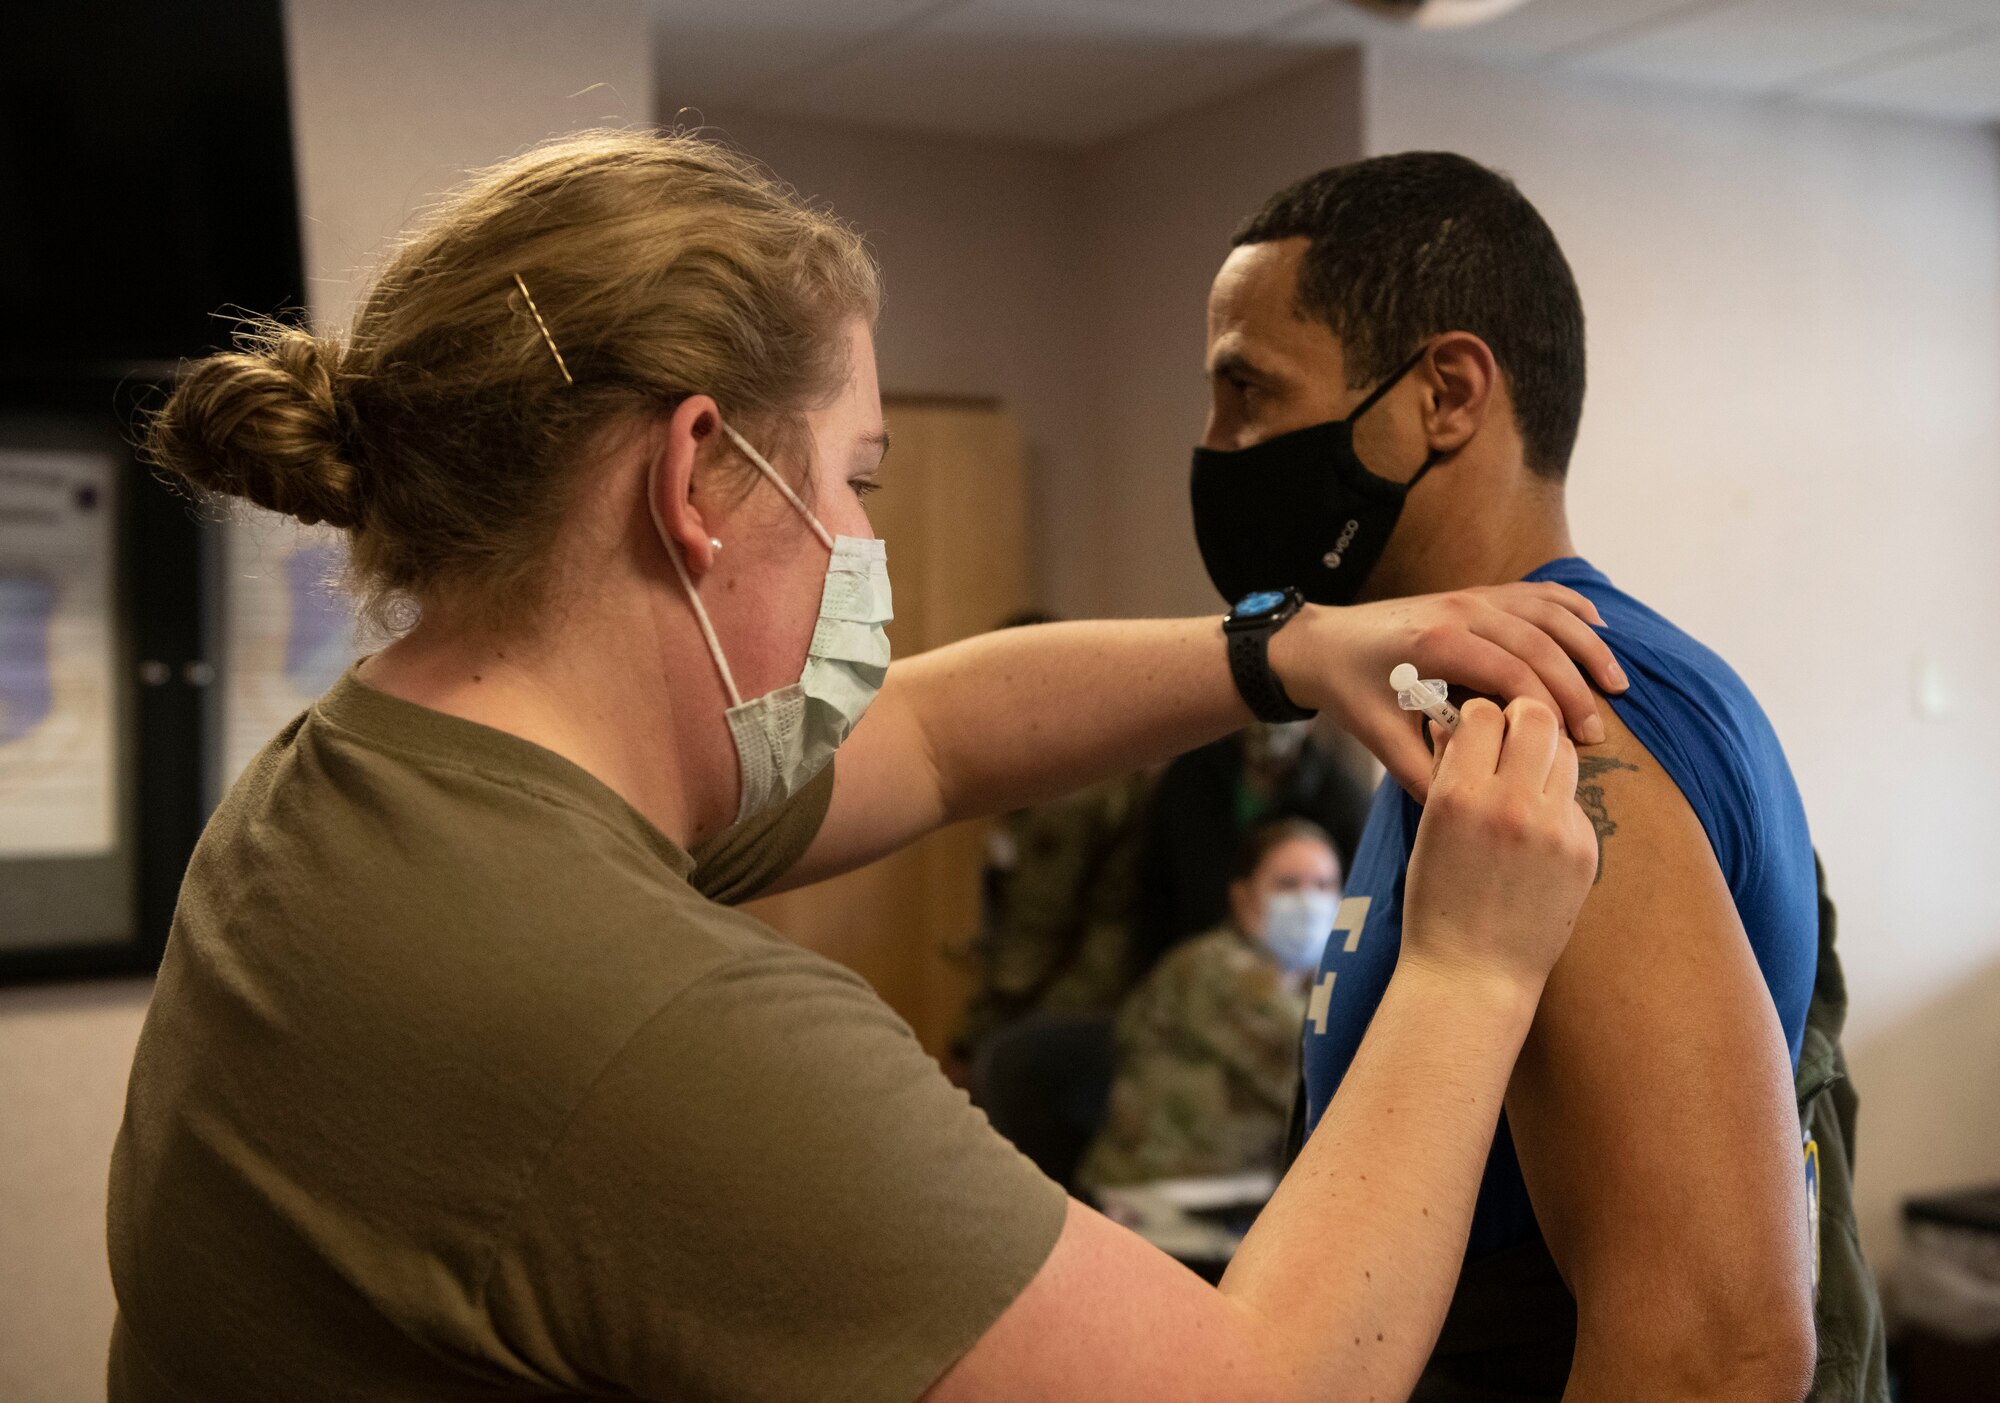 Staff Sgt. Alexandria Lovell, 319th Health Care Operations Squadron family medicine noncommissioned officer in charge, administers a COVID-19 vaccine to Col. Timothy Curry, 319th Reconnaissance Wing vice commander, at Grand Forks Air Force Base, N.D., Jan. 22, 2021. The vaccine was authorized for emergency use by the U.S. Food and Drug Administration after undergoing careful and rigorous testing and trials.